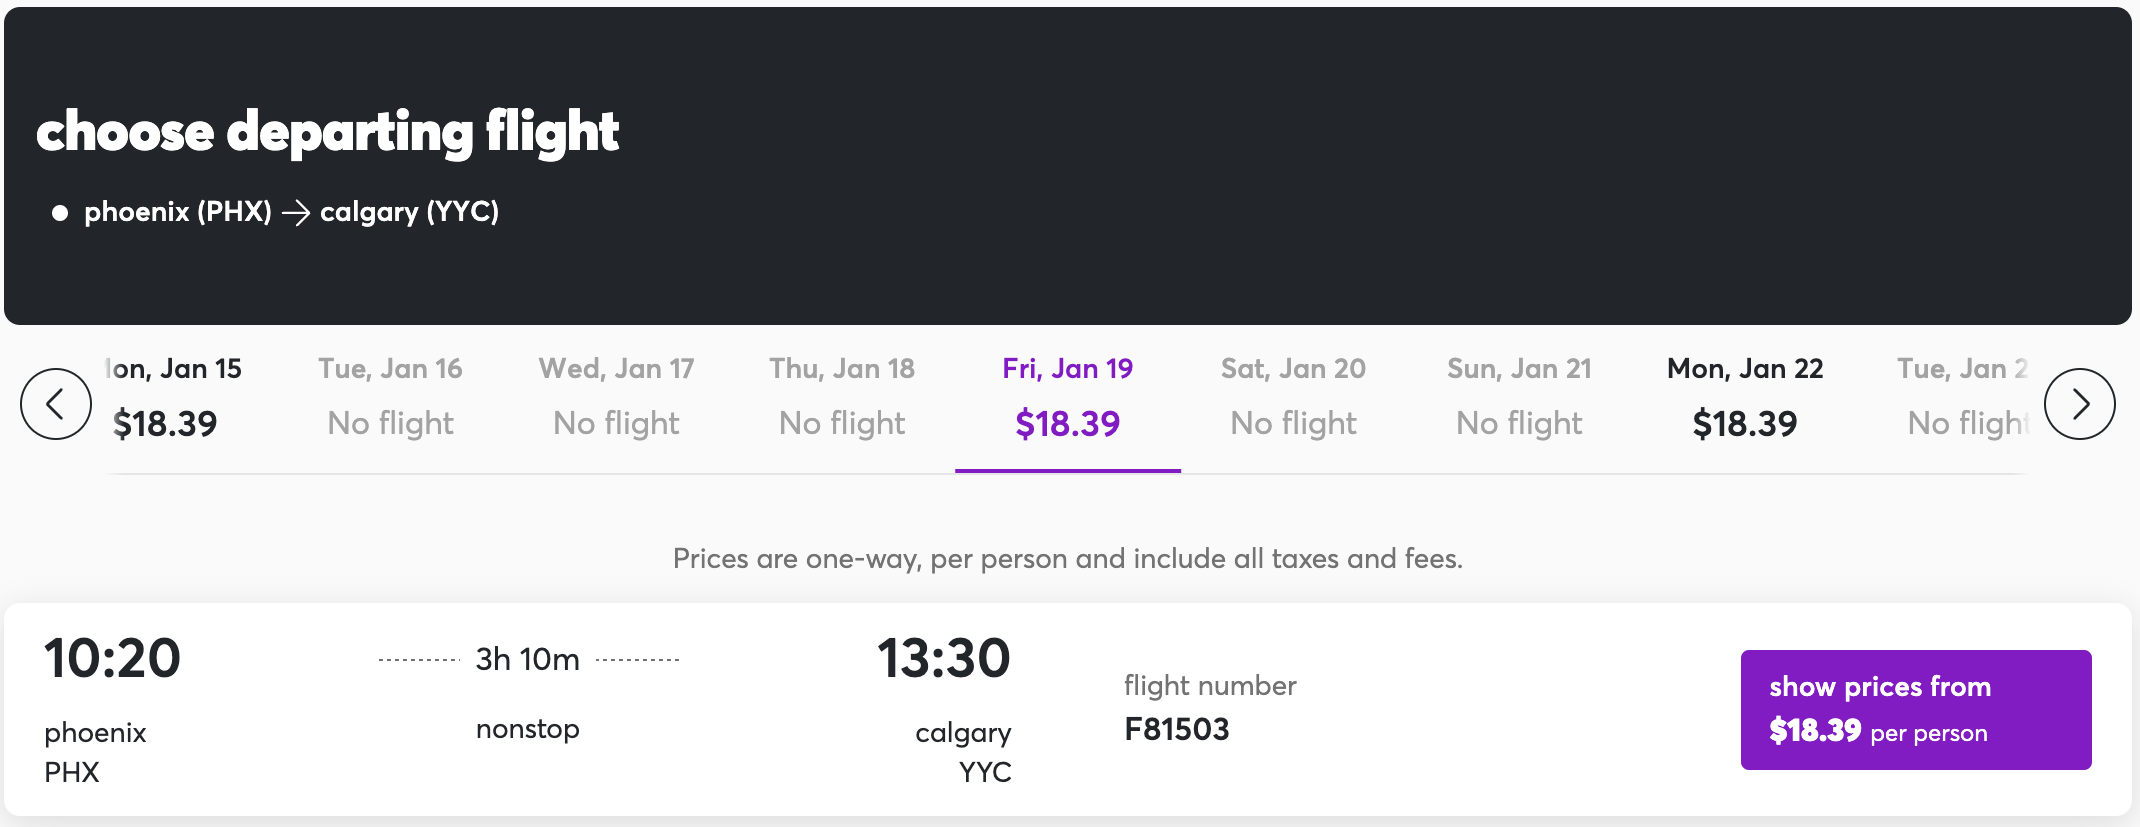 Flair is offering ultra cheap flights from Phoenix to Calgary right now